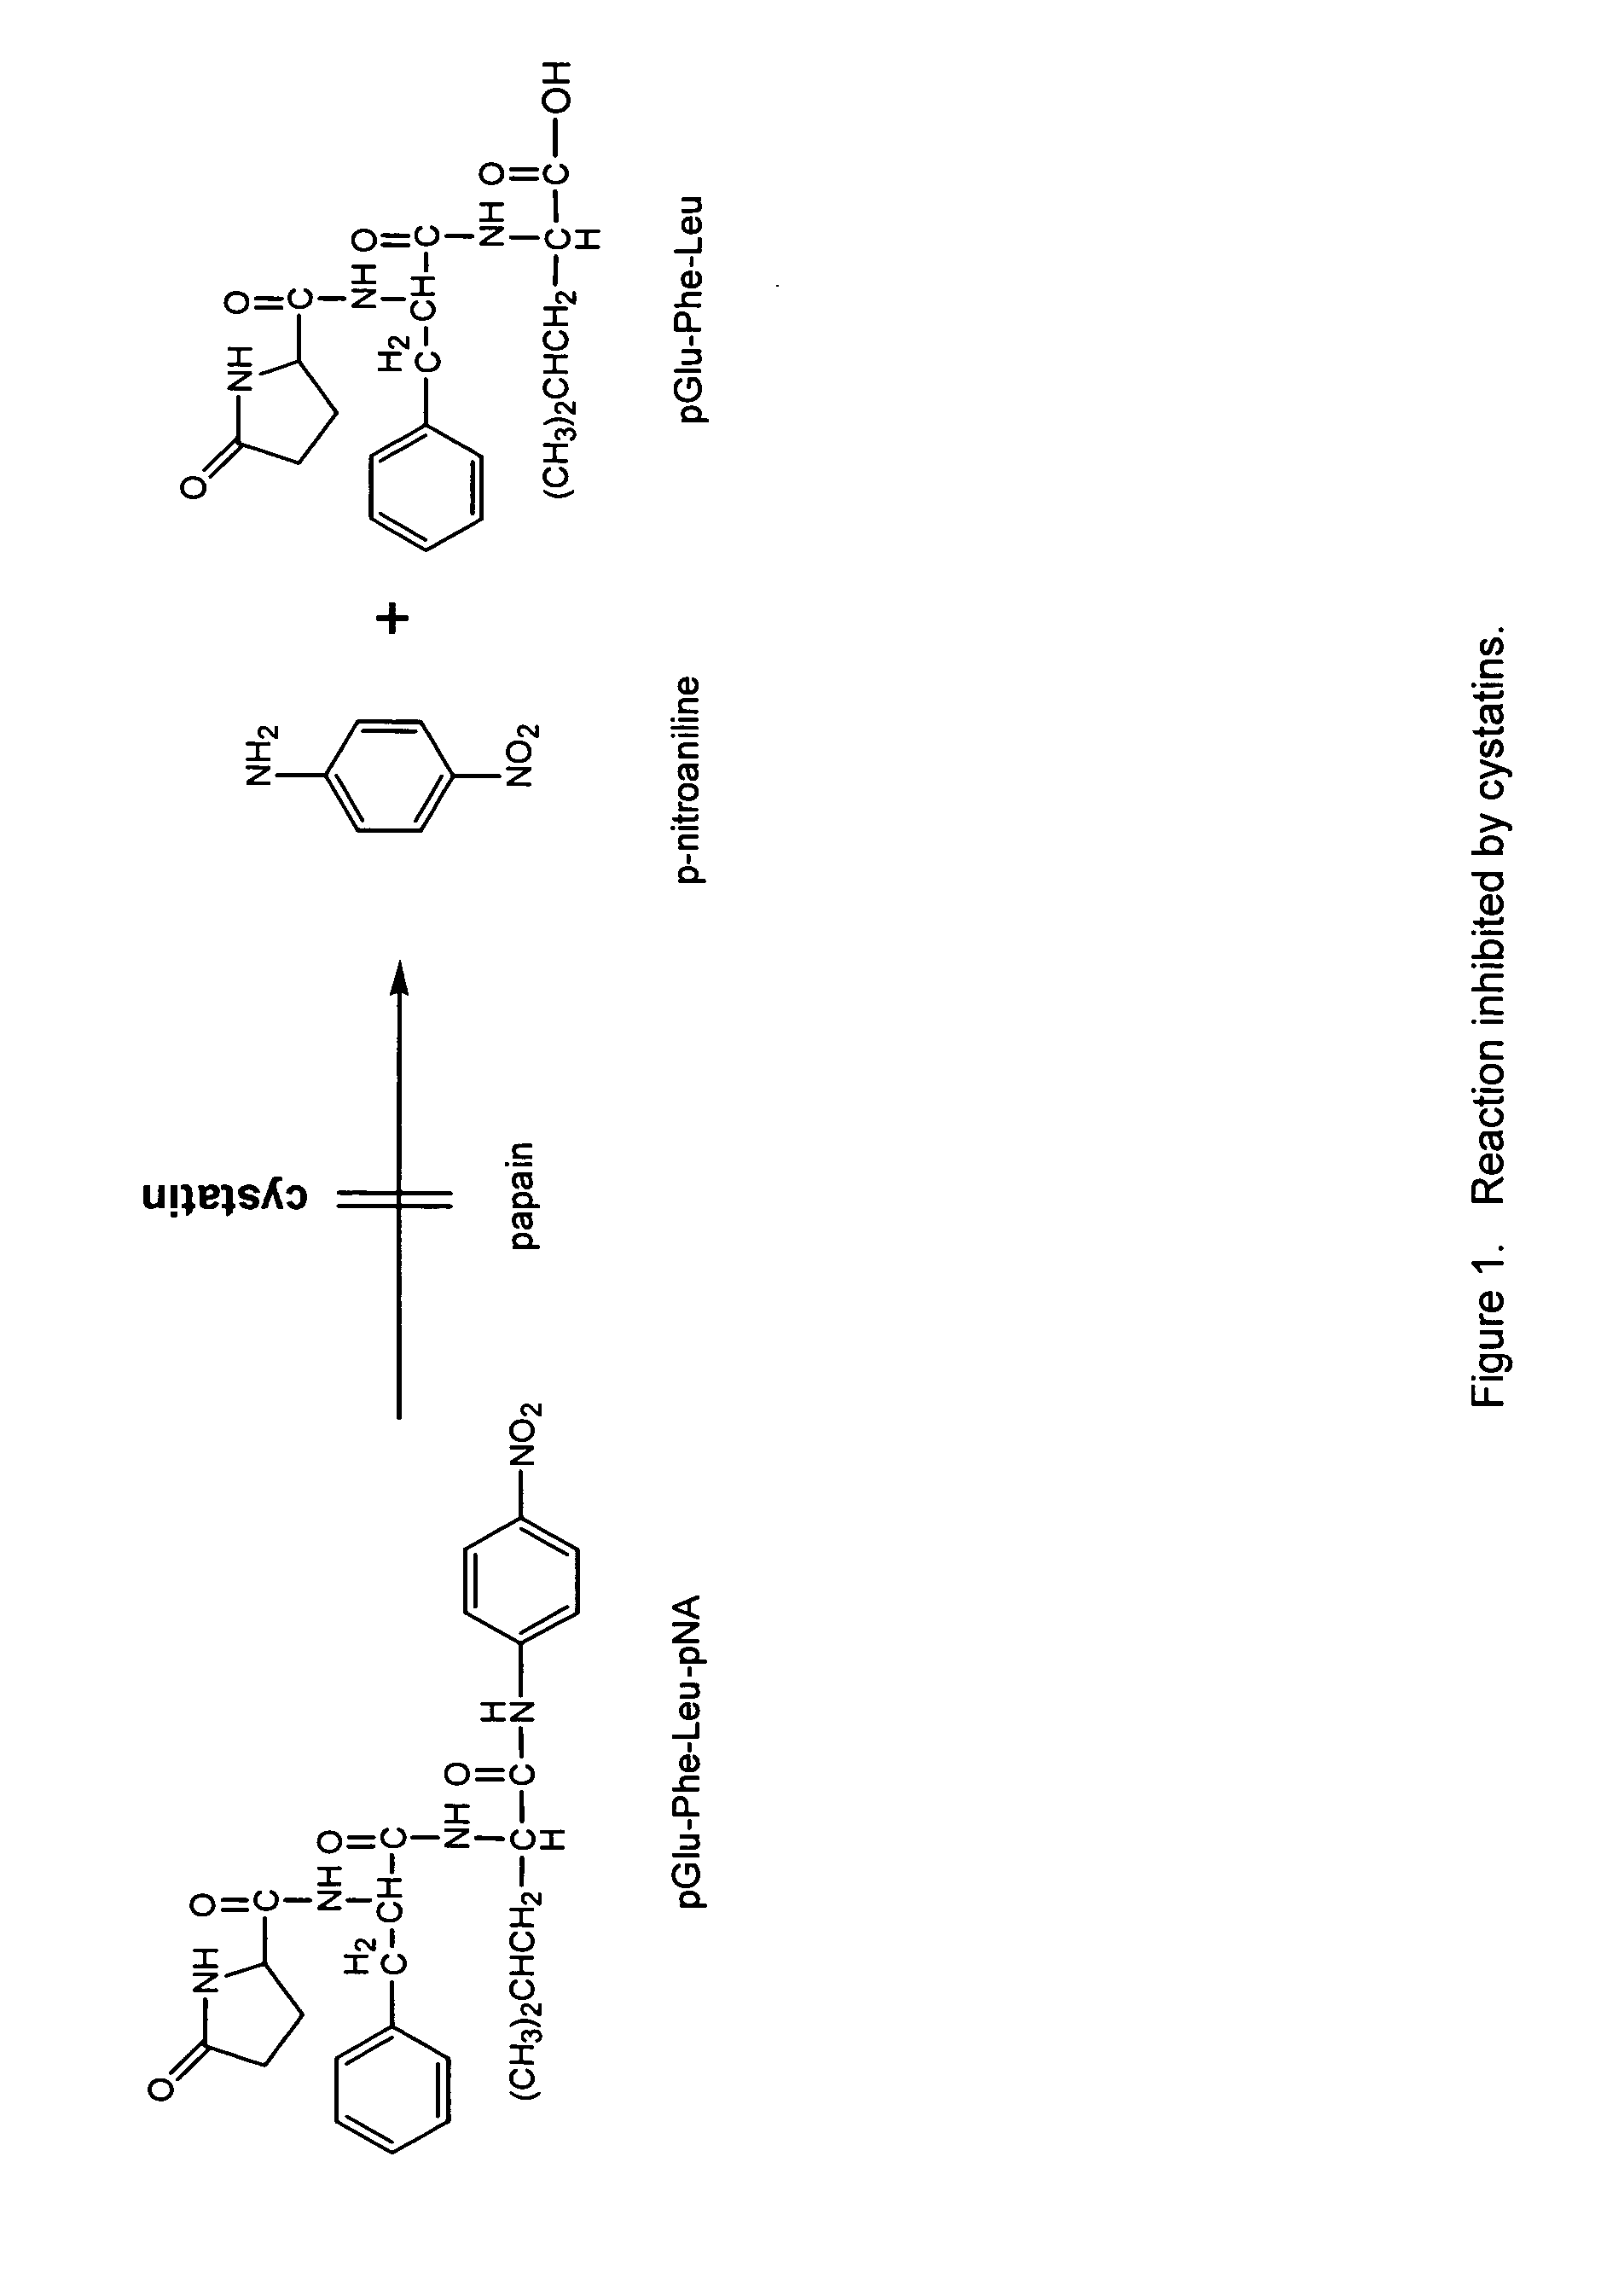 Crop plant cystatin proteinase inhibitors and methods of use